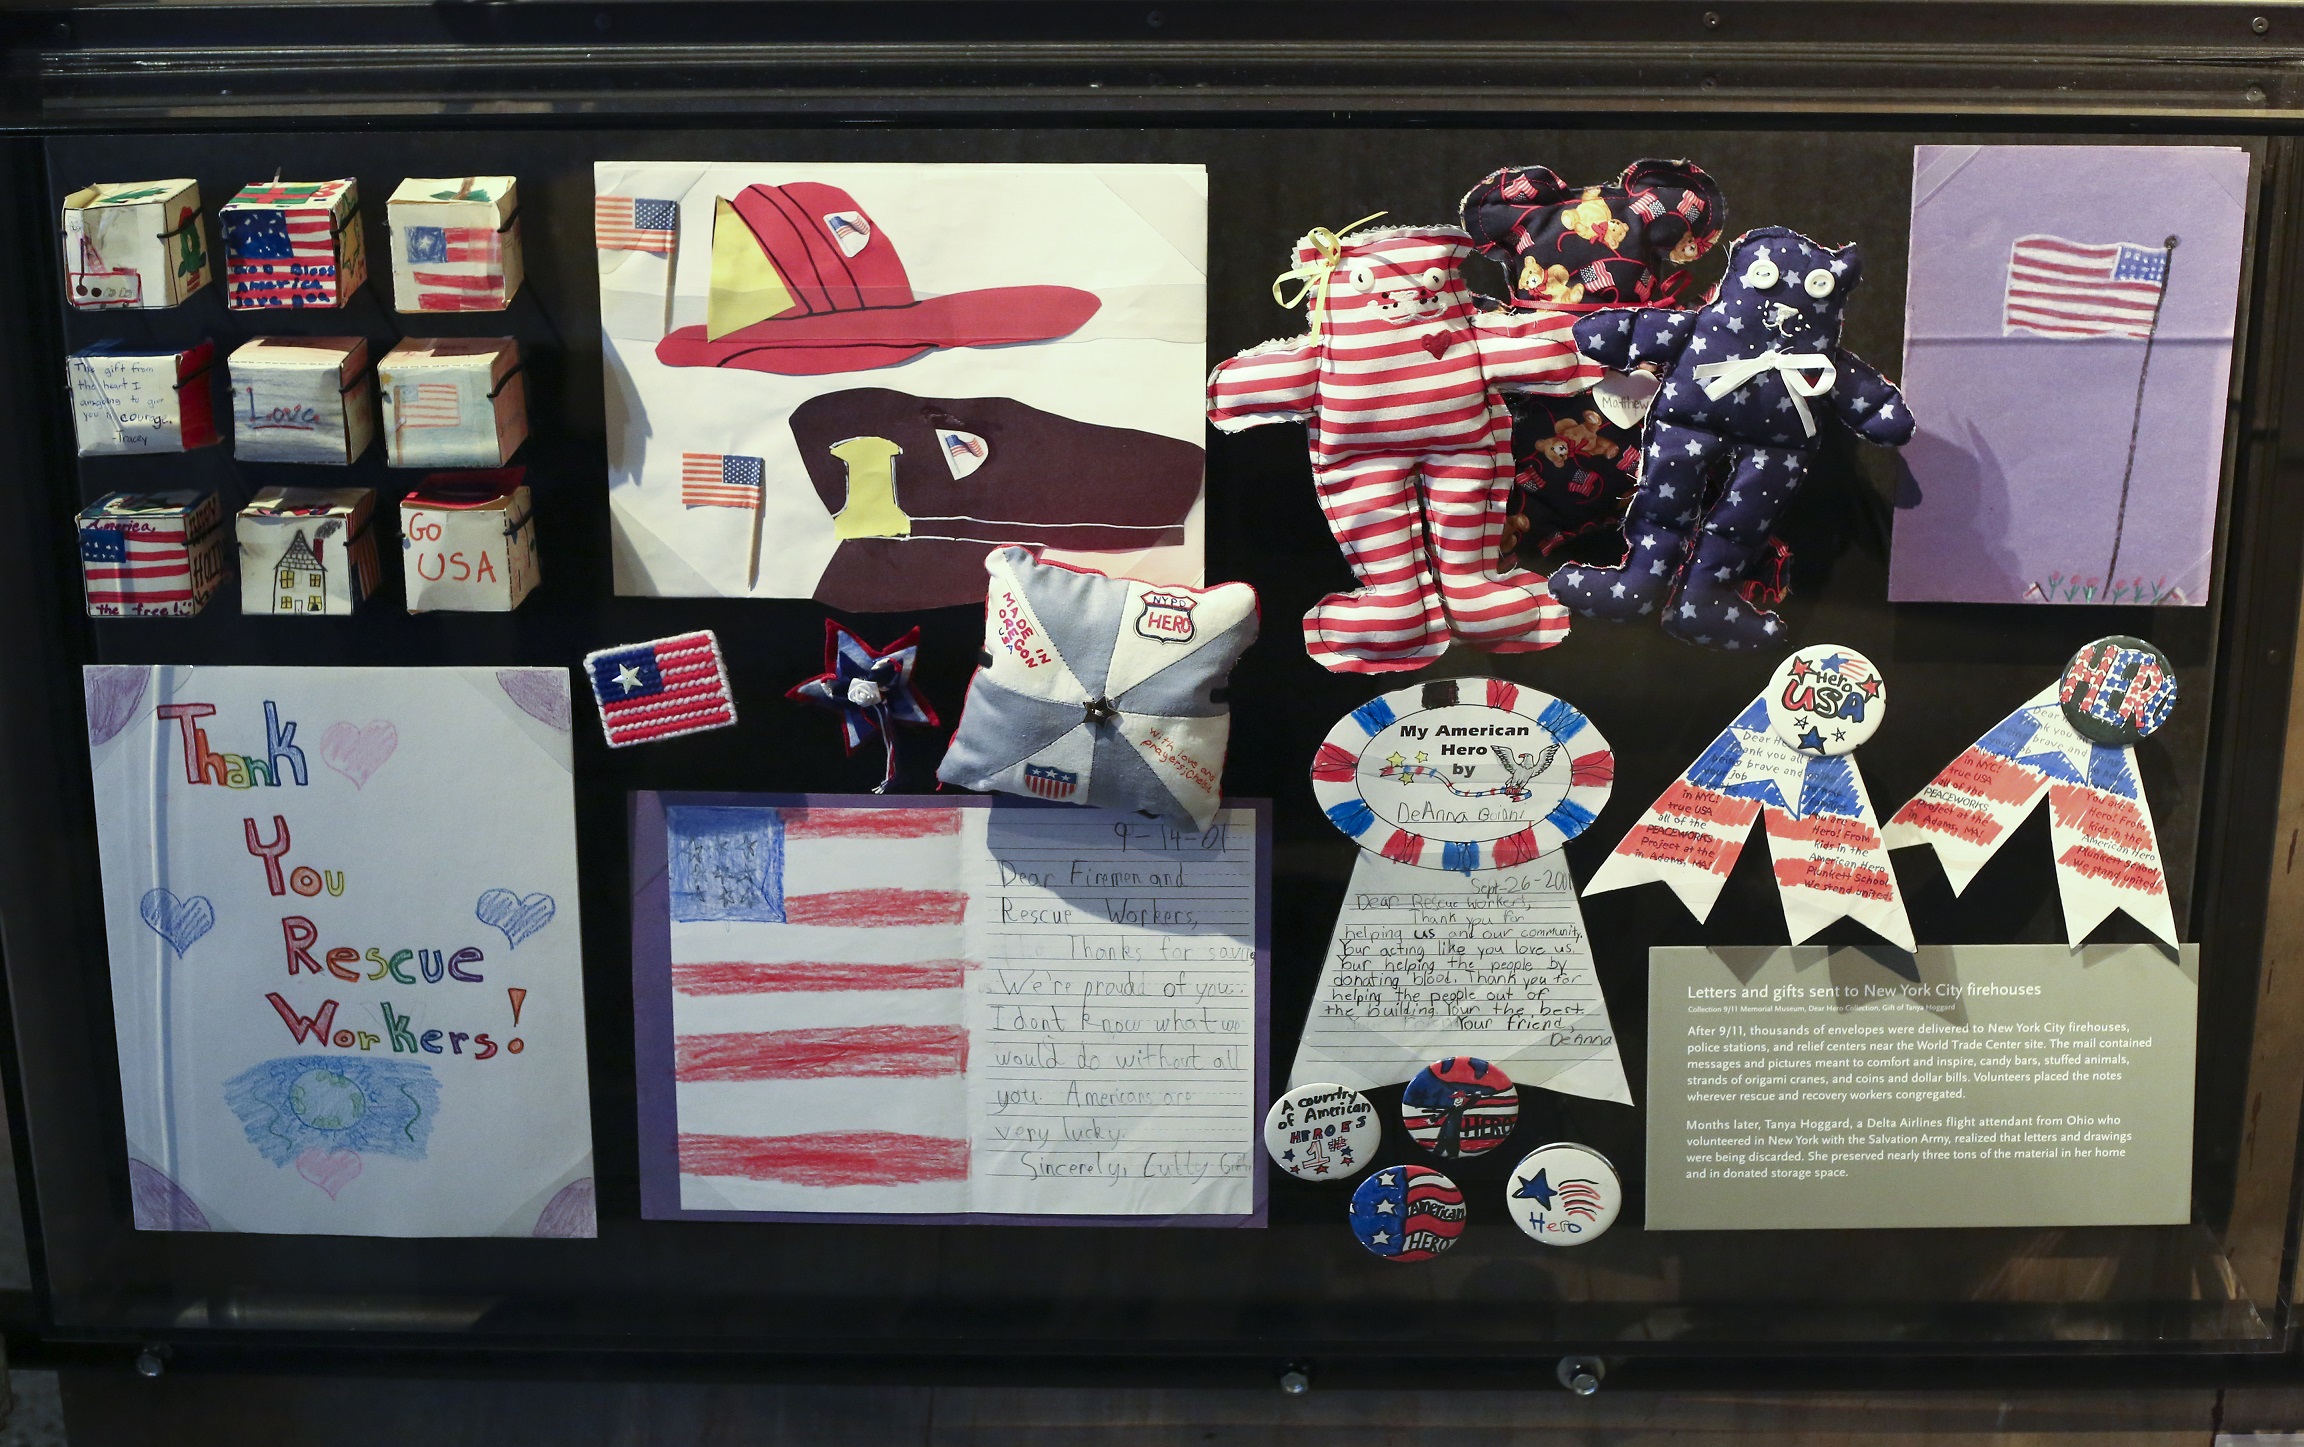 An exhibition in the Museum’s Historical Exhibition shows items on display in the “Dear Hero” collection. Among the items are children’s drawings, as well as small teddy bears and pins, many with a patriotic theme.